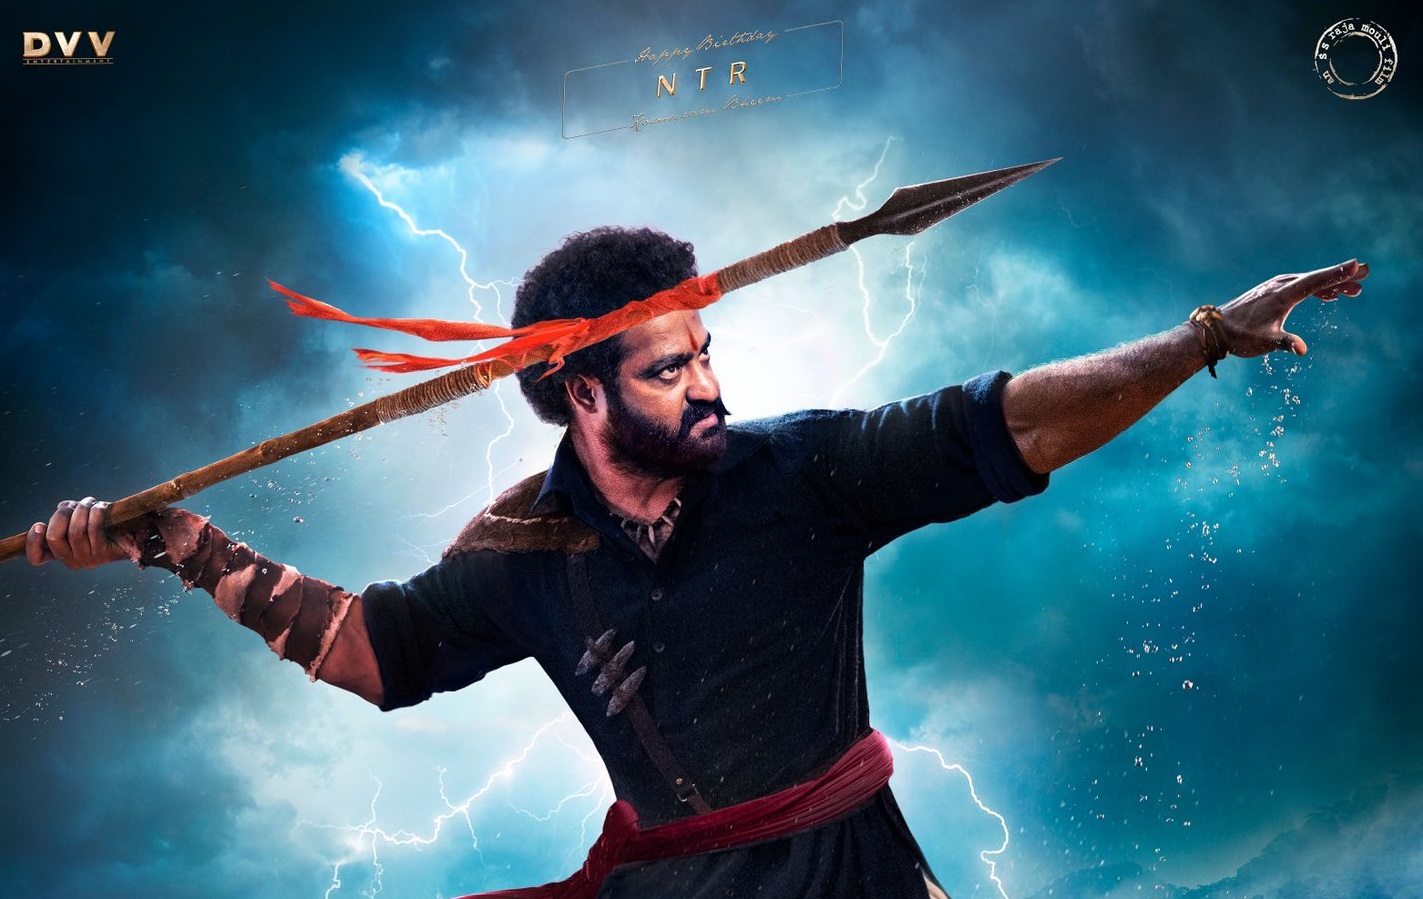 Makers of RRR unveil a new poster featuring Jr NTR